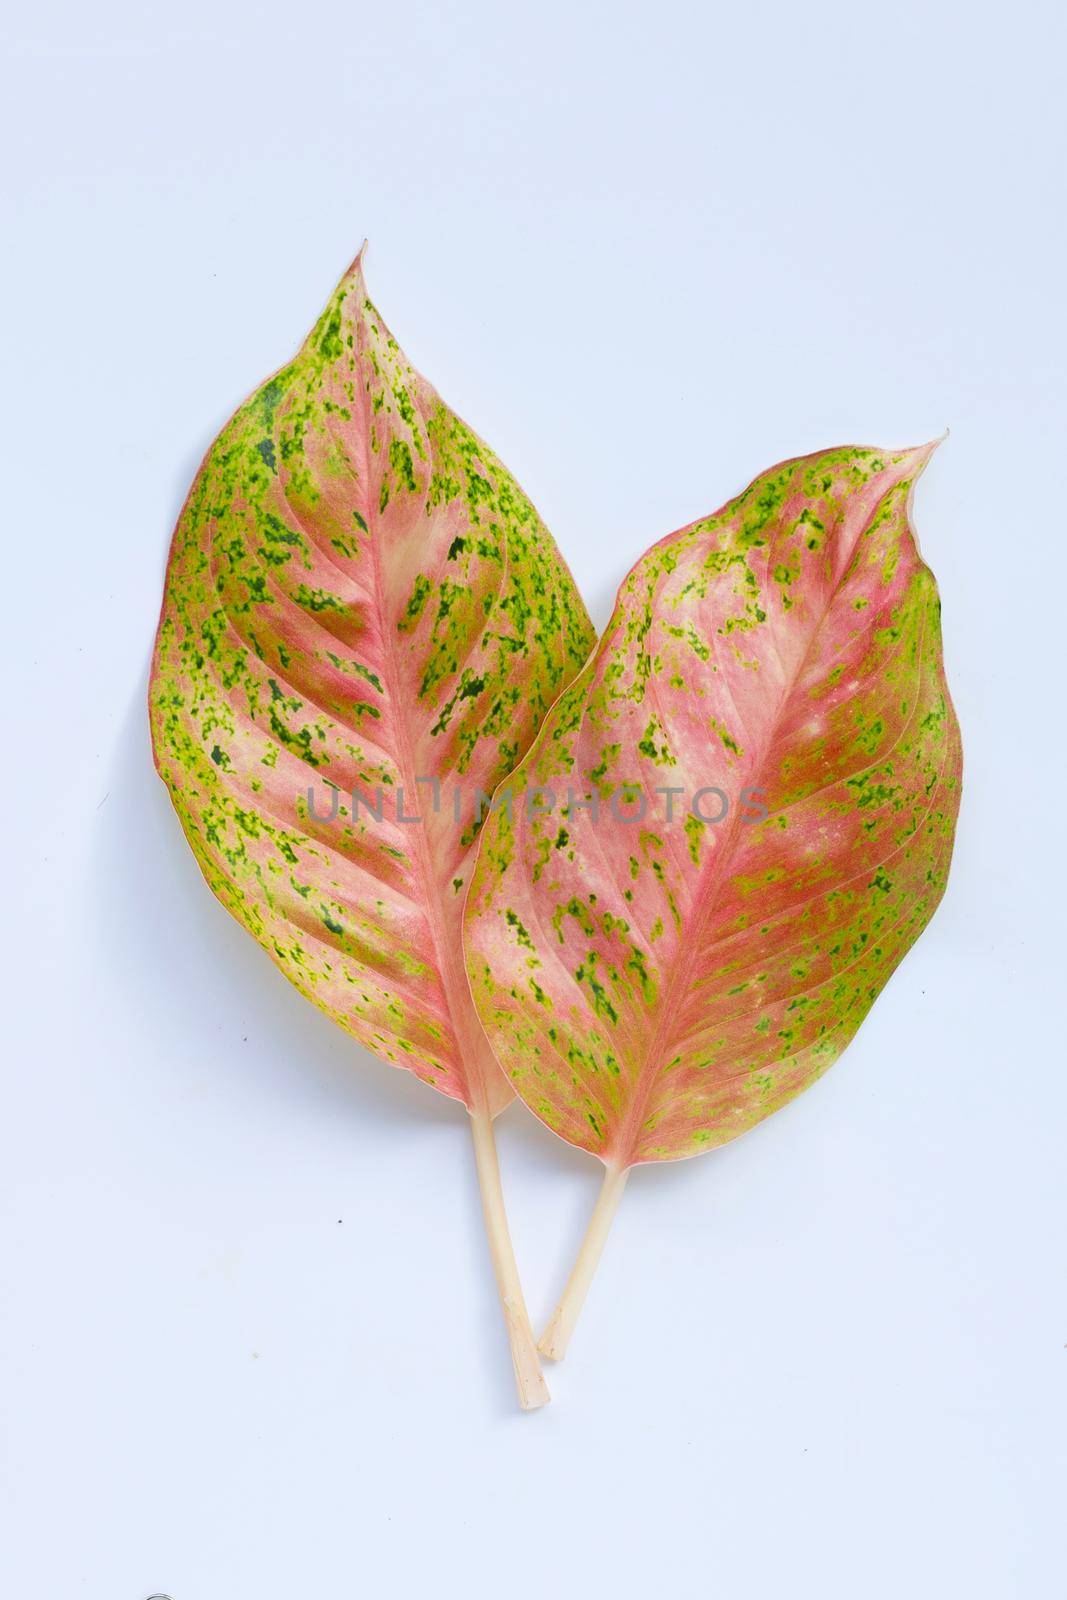 Colorful aglaonema leaves on white background.